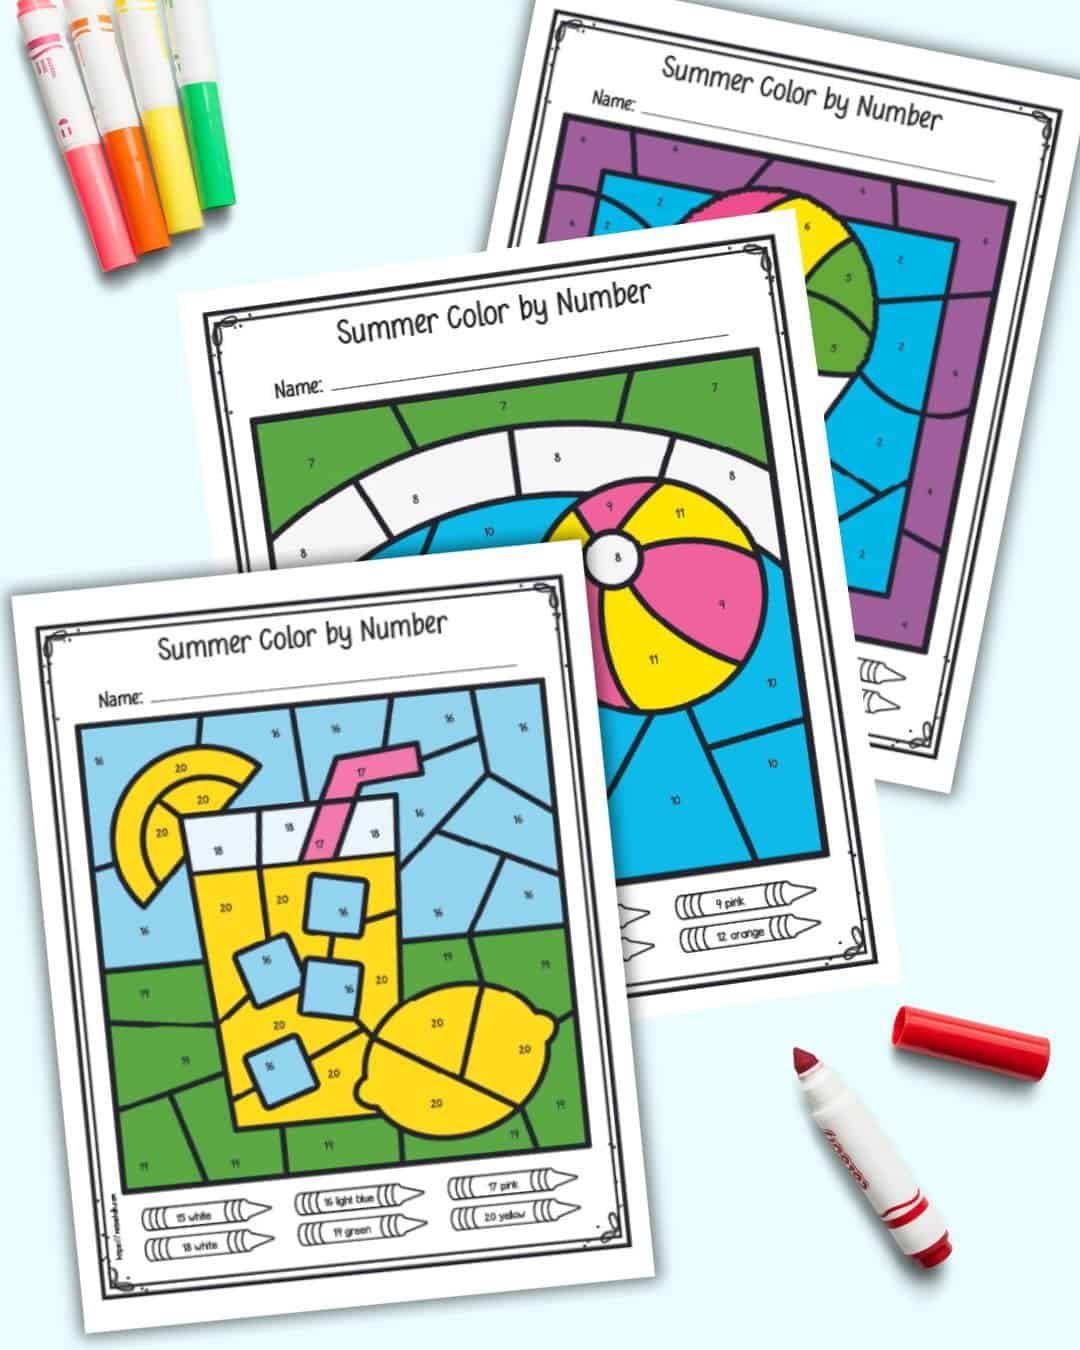 A preview of three colored summer themed color by number pages. One shows lemonade, another a pool, and the last a snow cone.